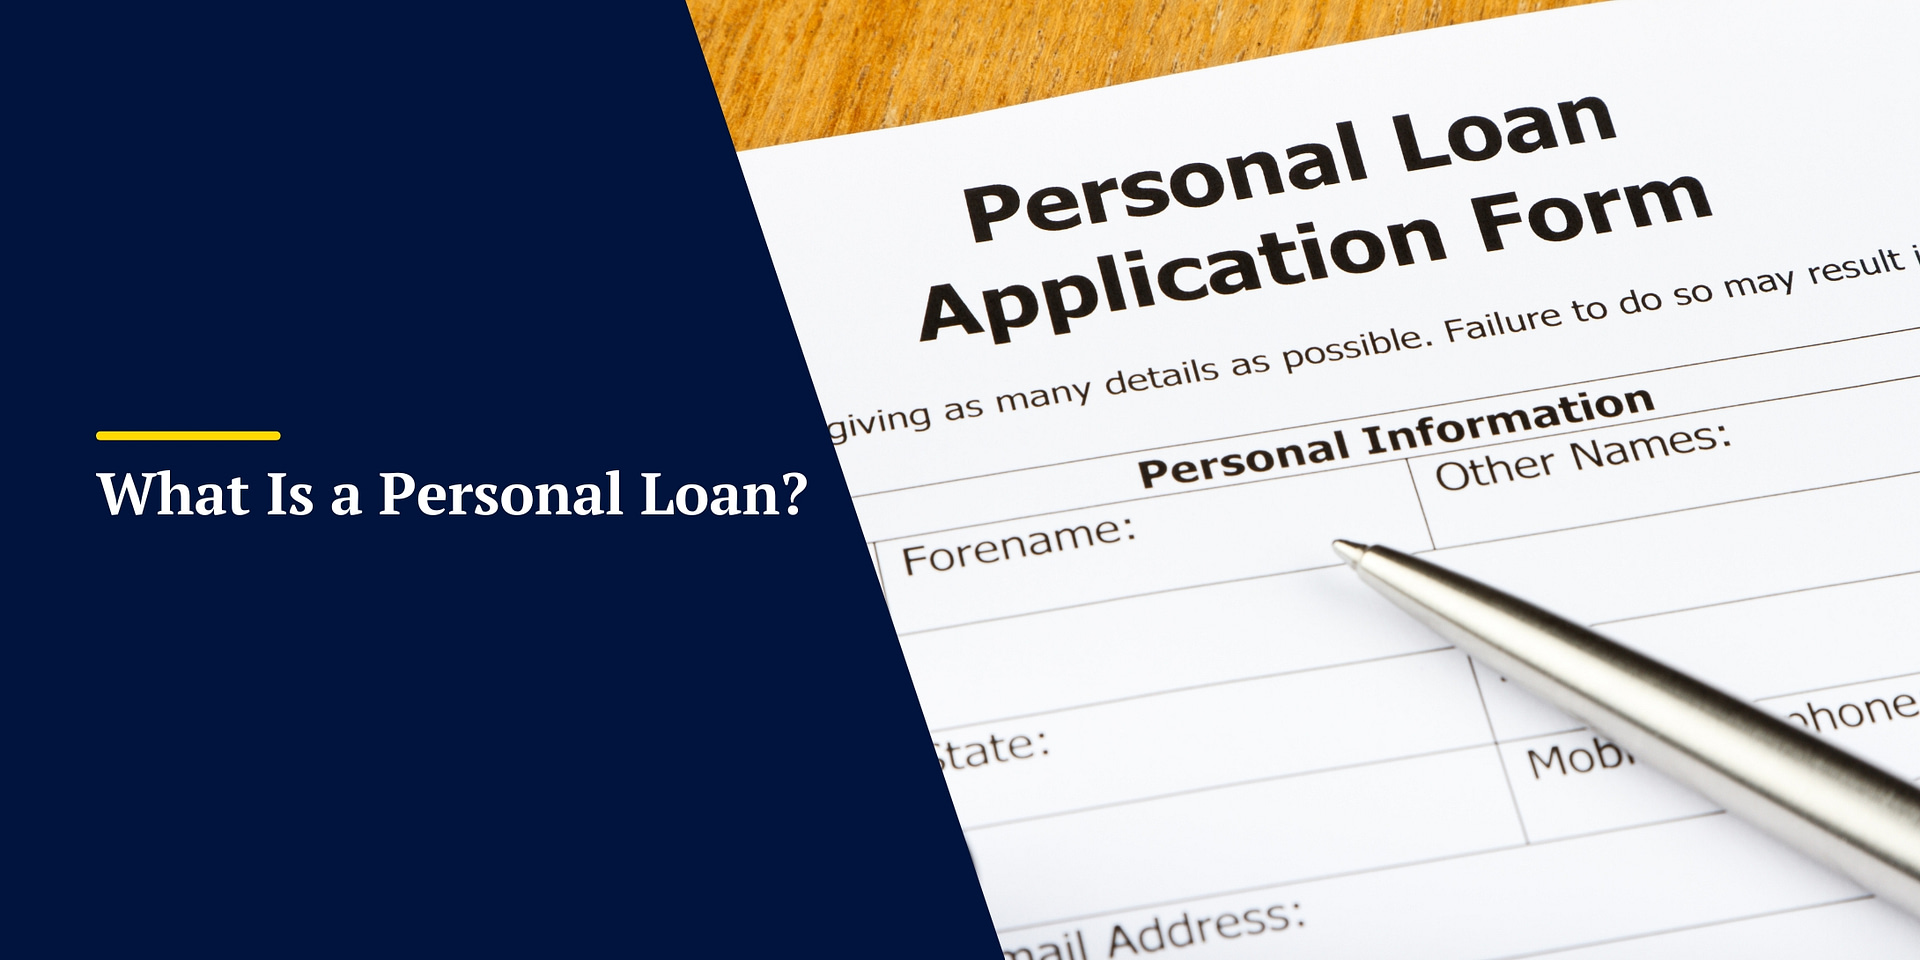 Types of personal loans